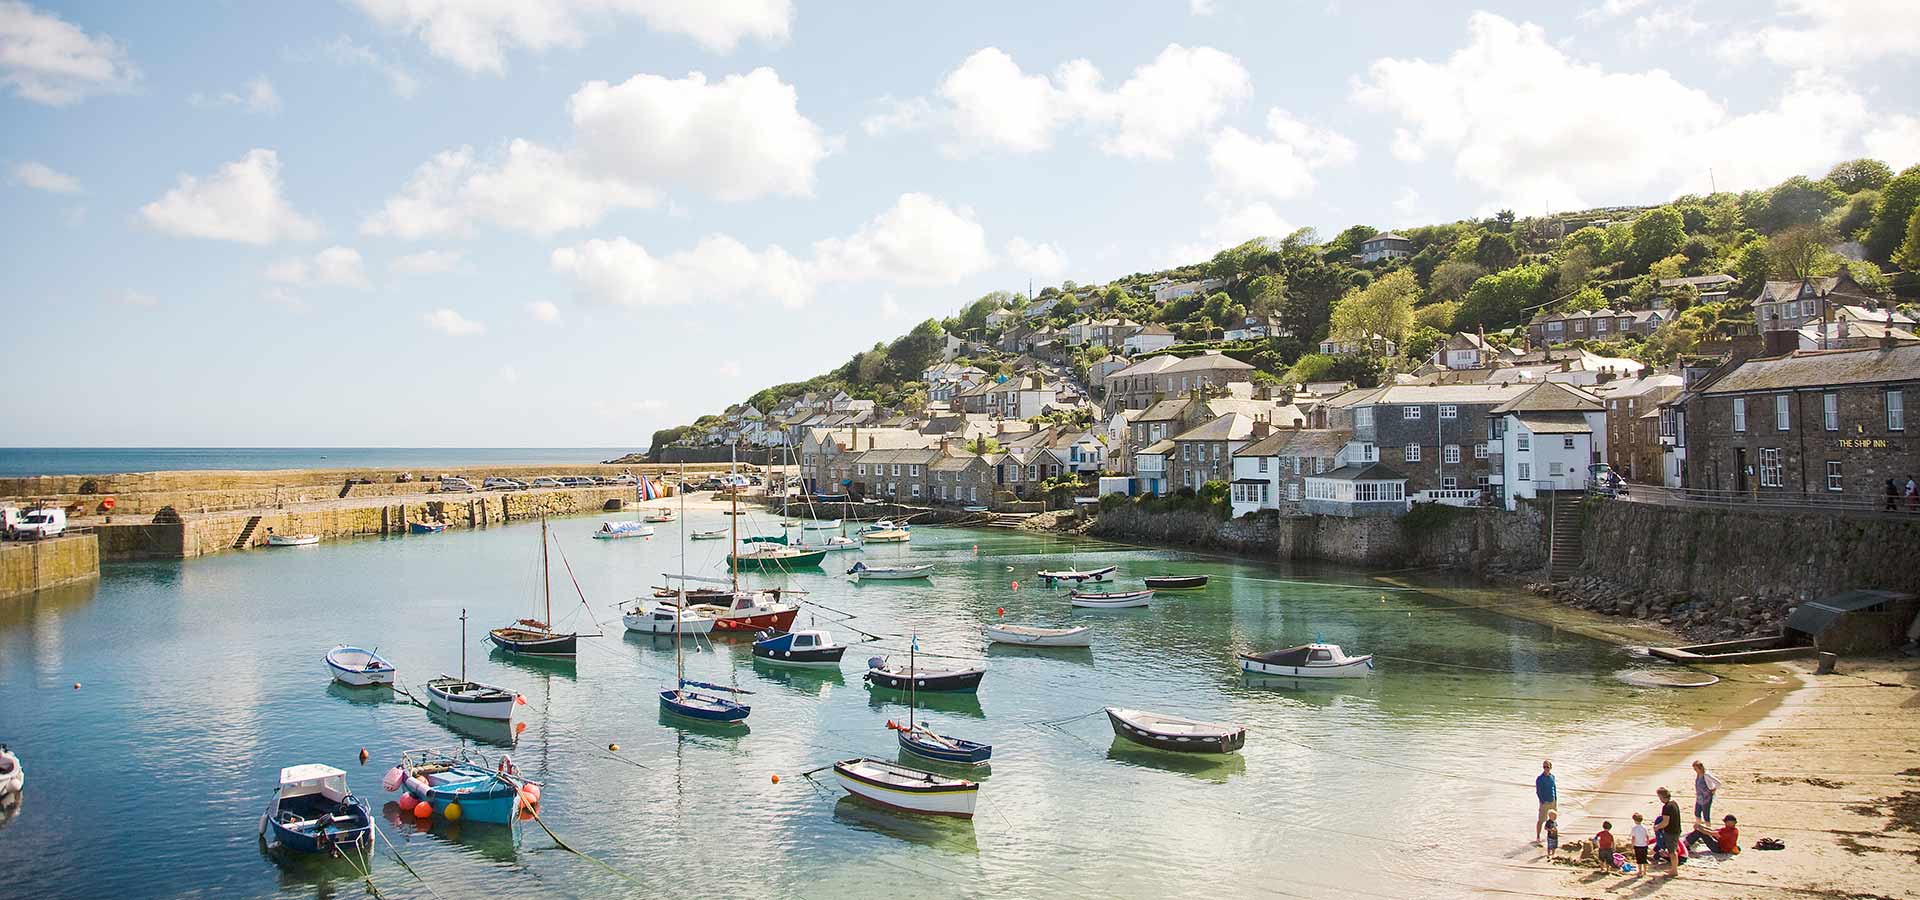 Holiday Cottages in Cornwall, UK | Aspects Holidays in St Ives